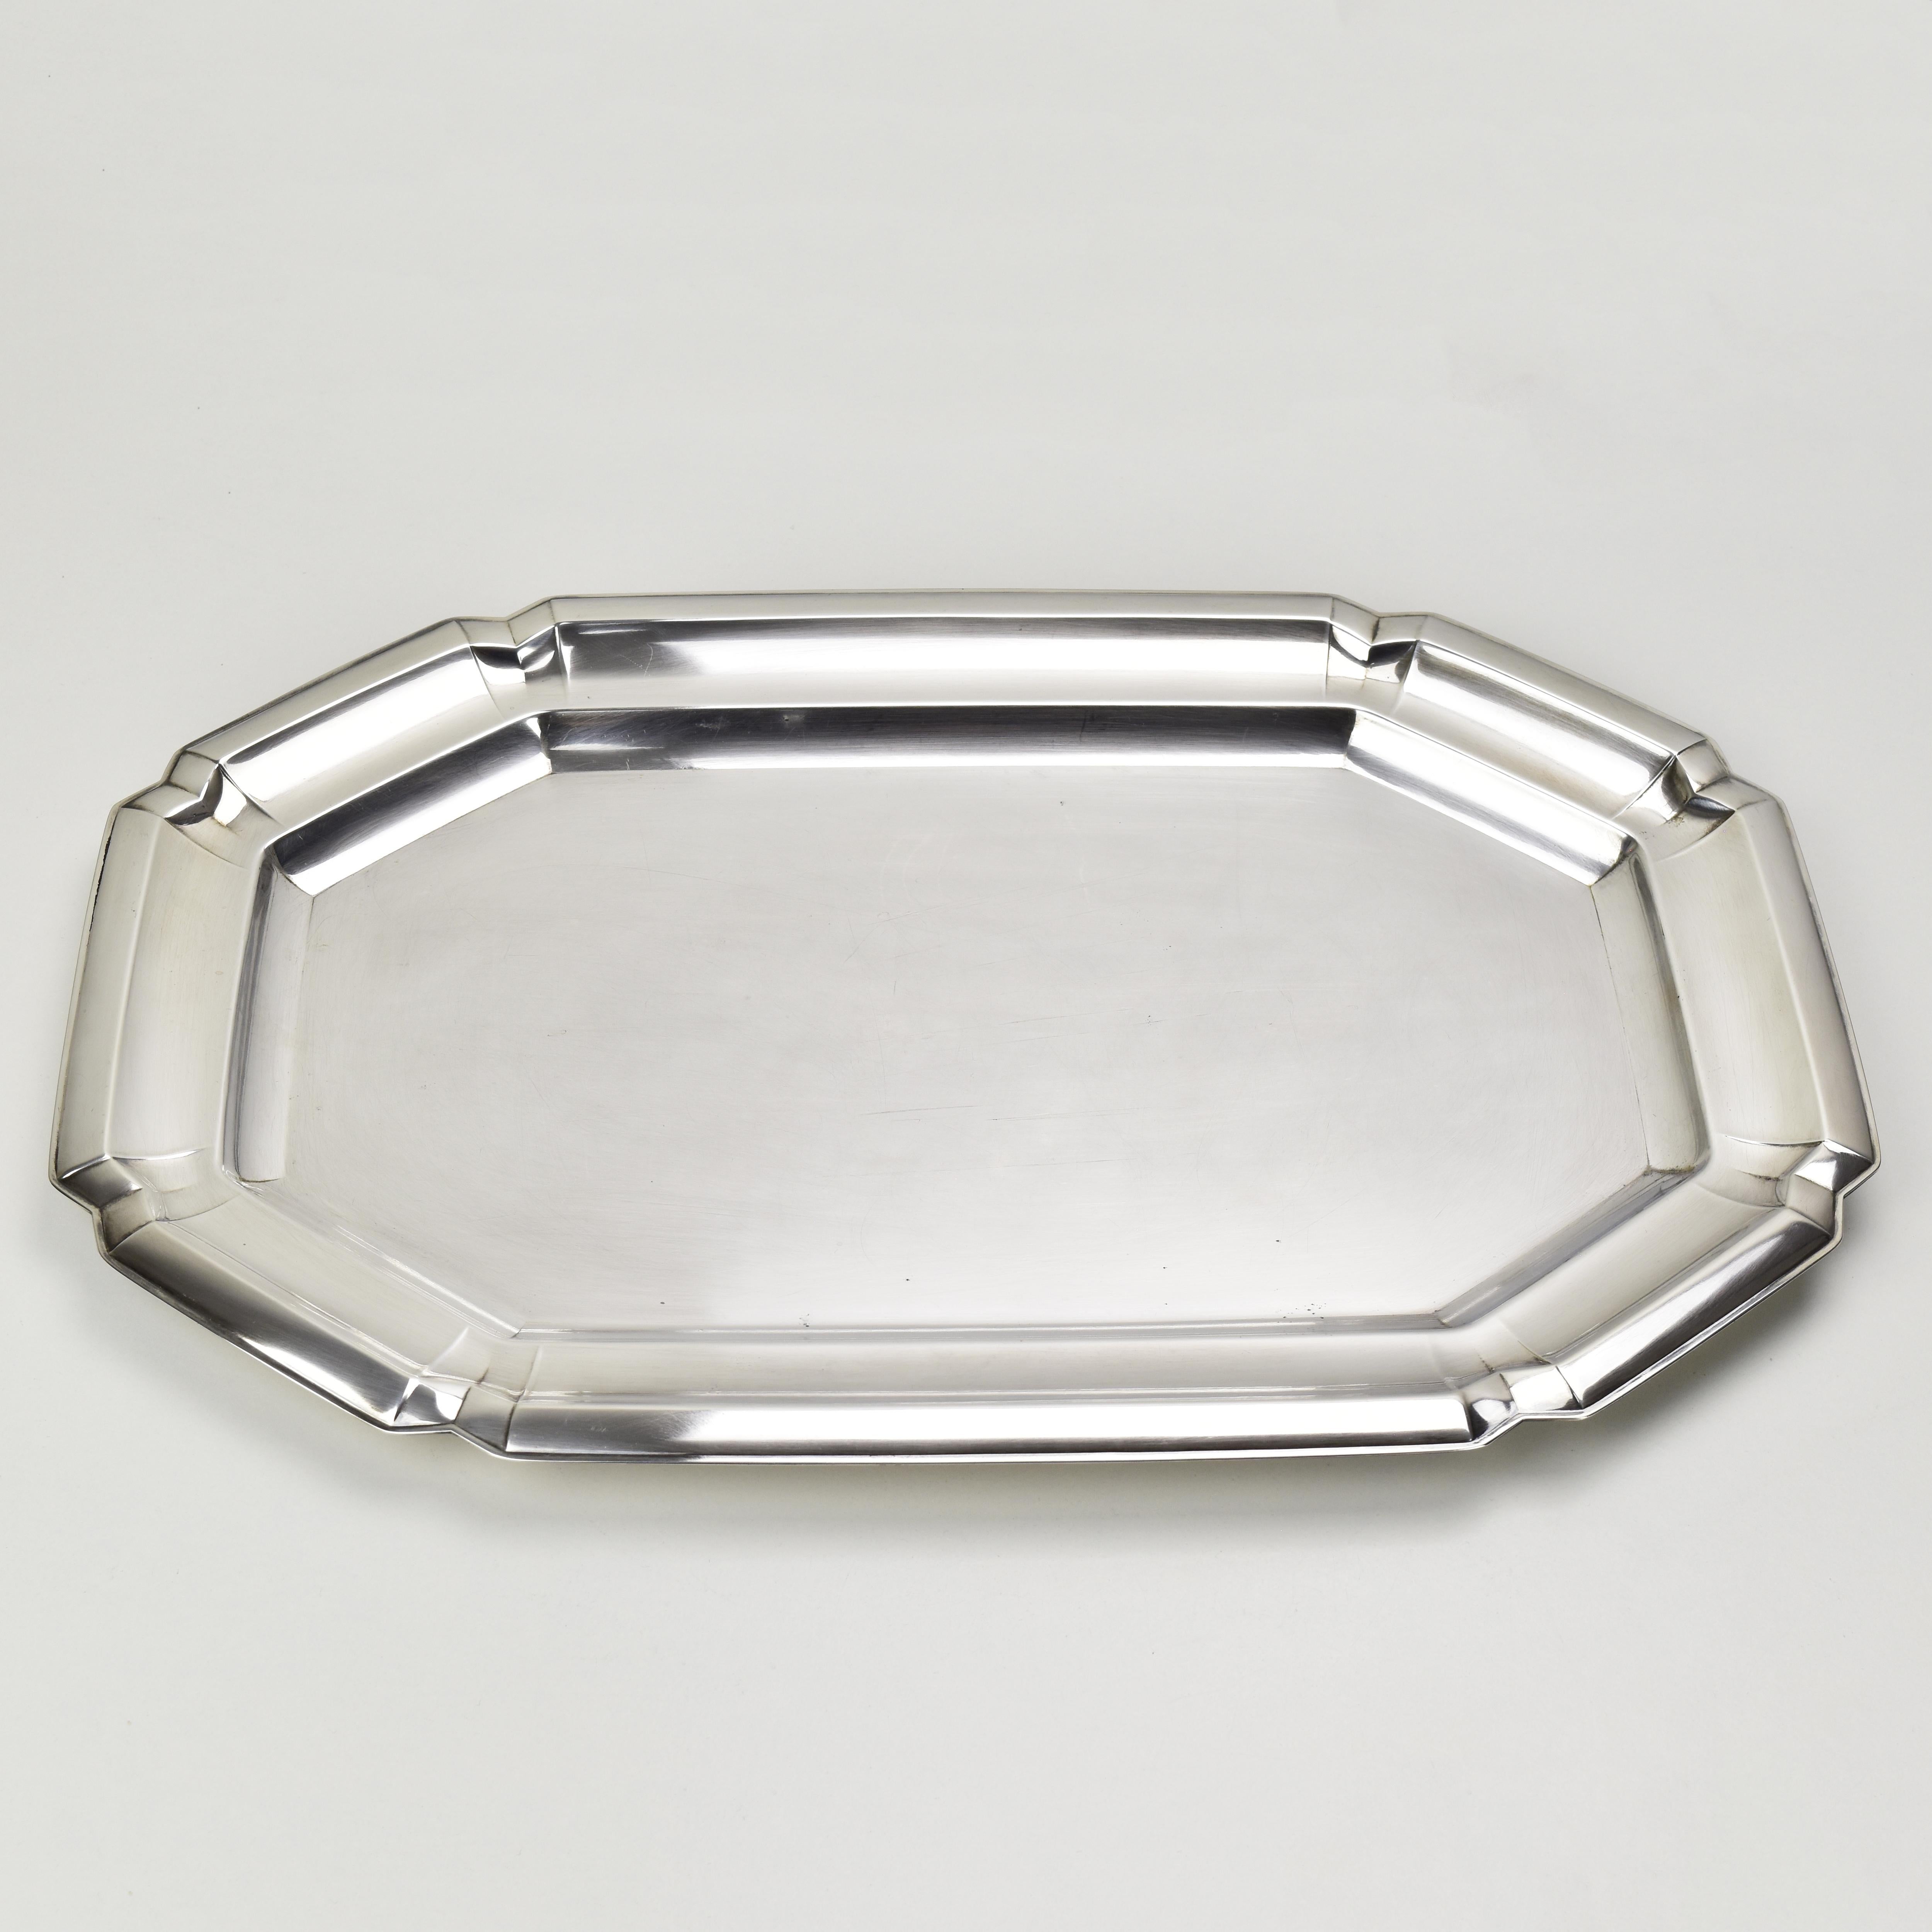 Large Art Deco Cabaret Bar Snack Tray by Quist Silverplate & Cut Crystal Liners For Sale 7